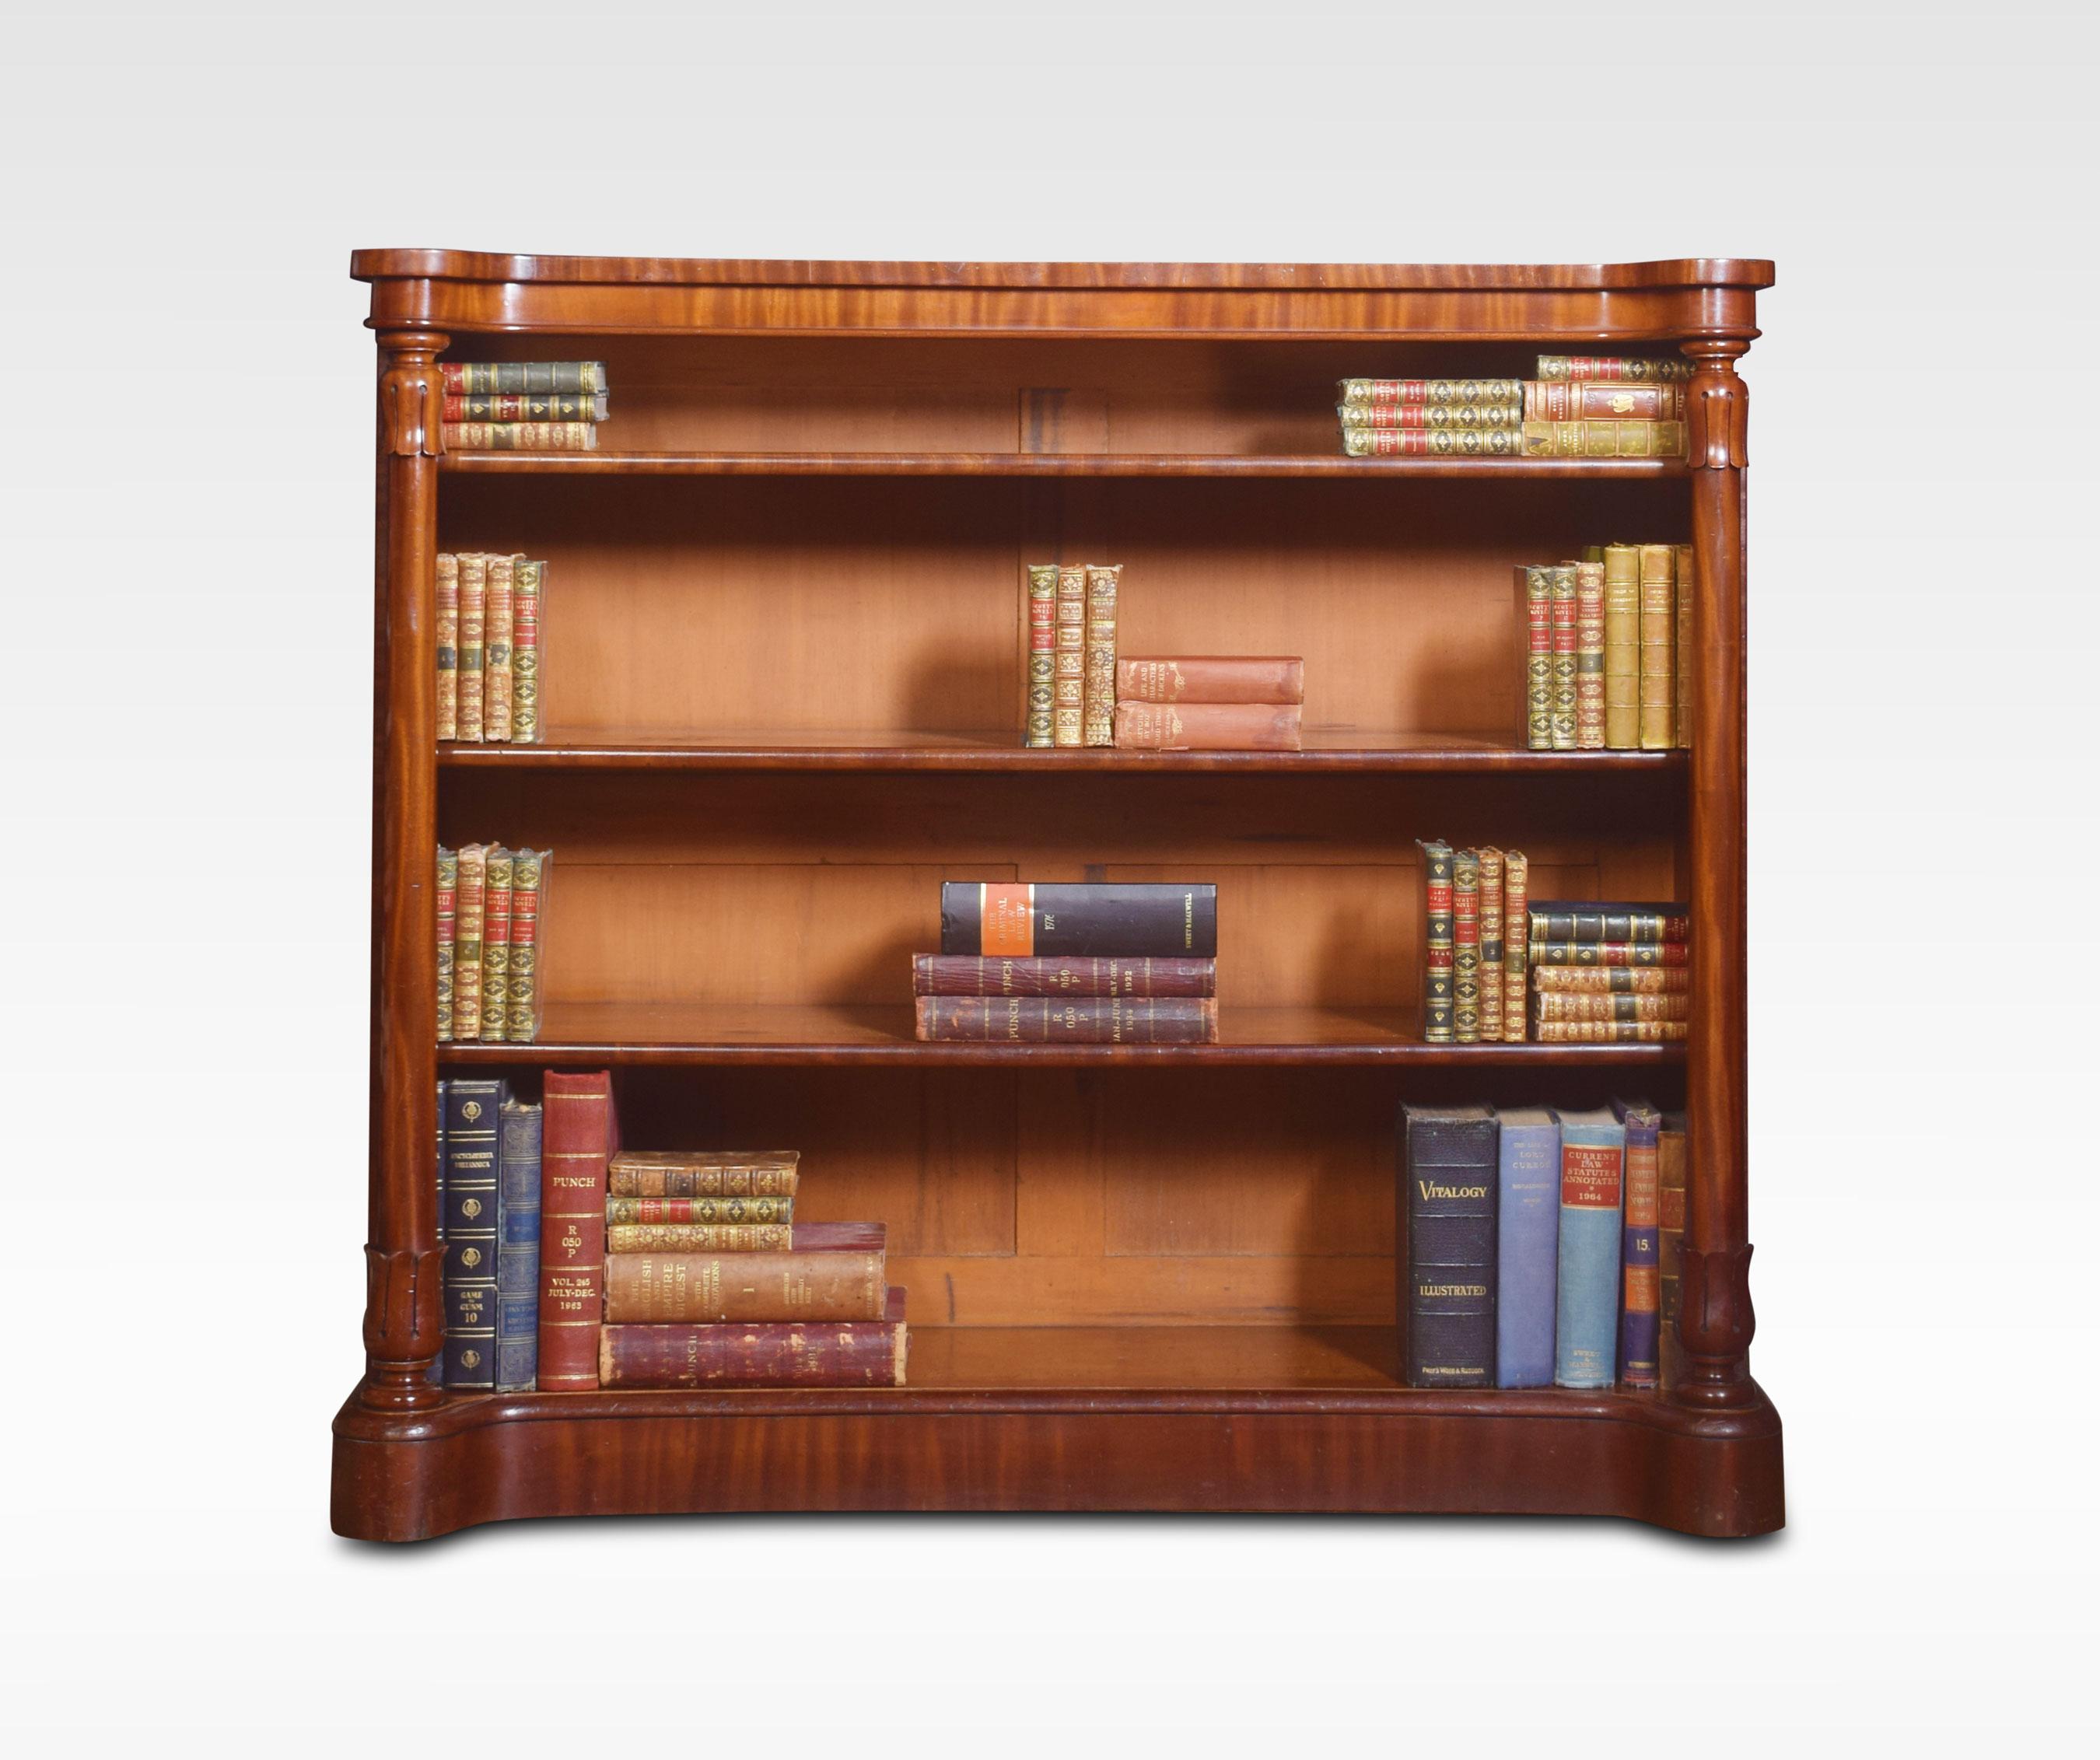 19th century mahogany bookcase, the shaped well-figured top supported on circular columns with carved capitals. Enclosing three fixed shelves, all raised up on plinth base.
Dimensions
Height 46 inches
Width 52.5 inches
Depth 19 inches.